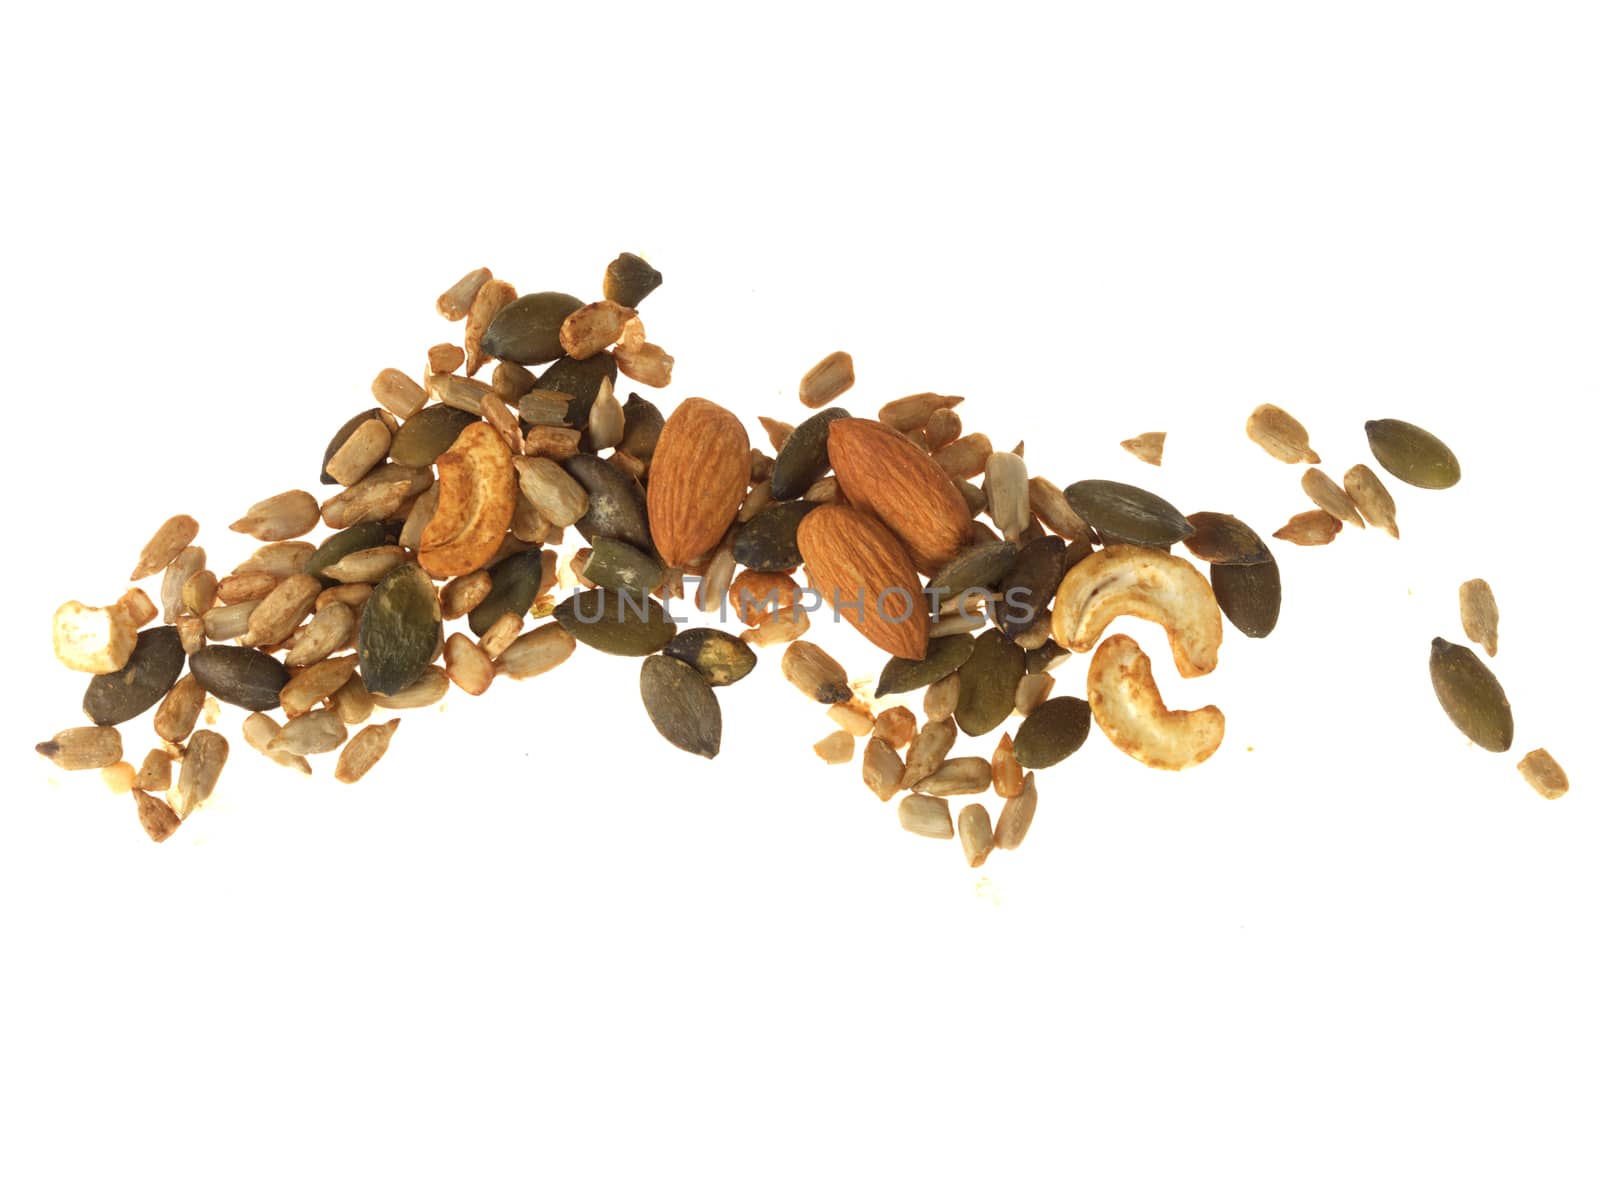 Seed and Nut Mix